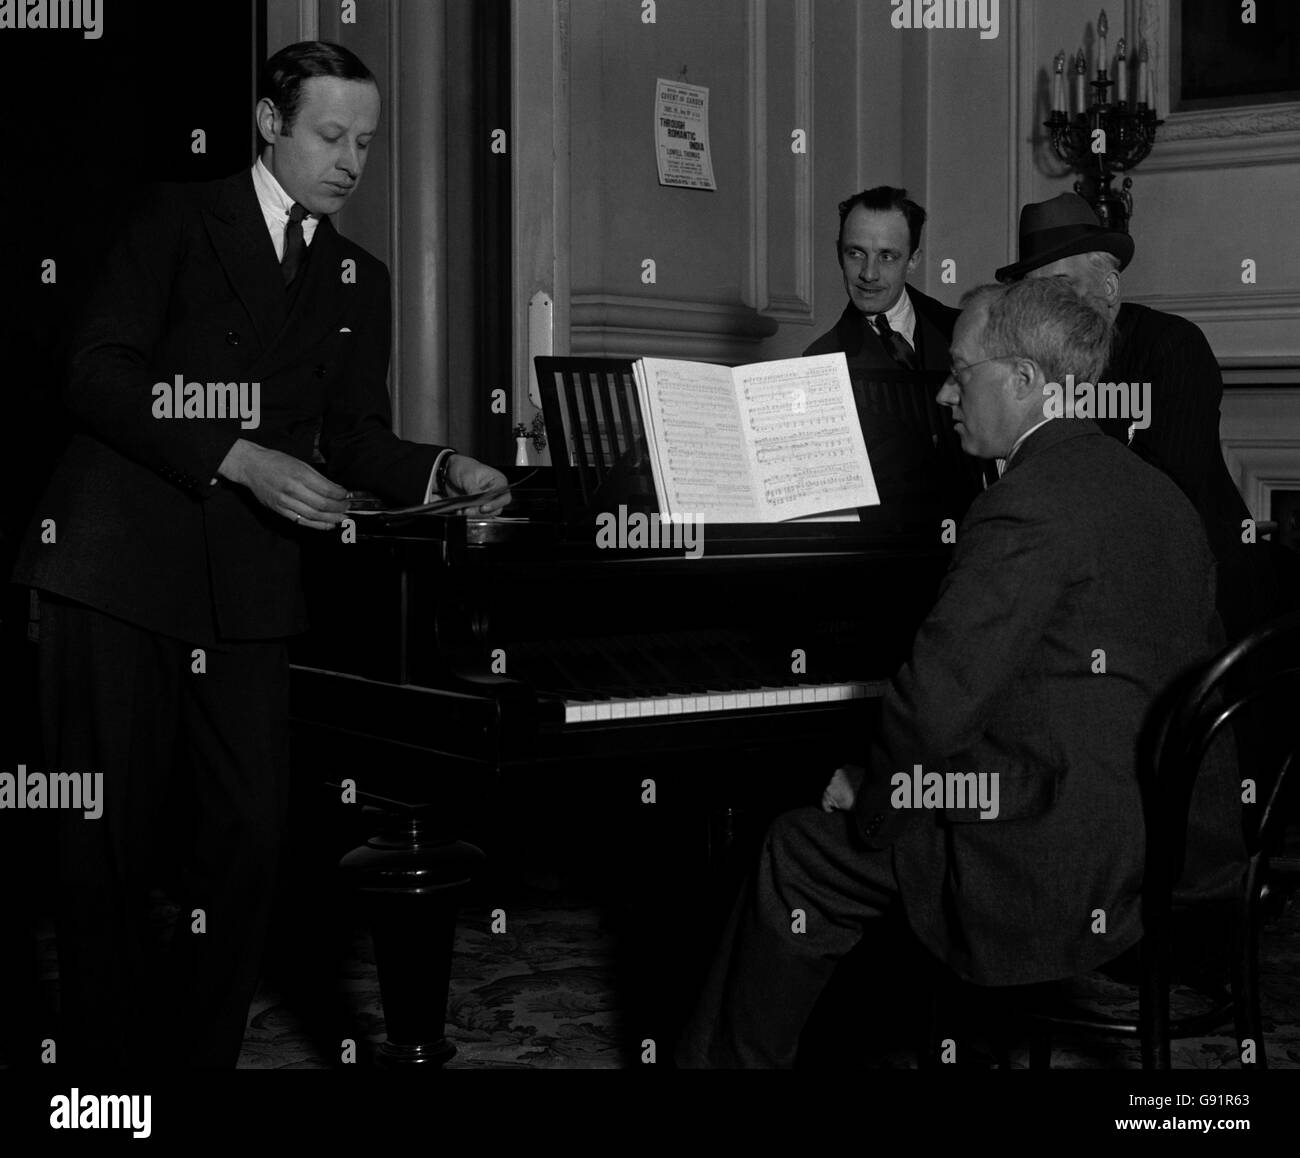 Preparing 'The Perfect Fool', by the British National Opera Company - Covent Garden Theatre. Gustave Holst, the composer, sitting at the piano, and Eugene Goossens, the conductor, looking on. Stock Photo